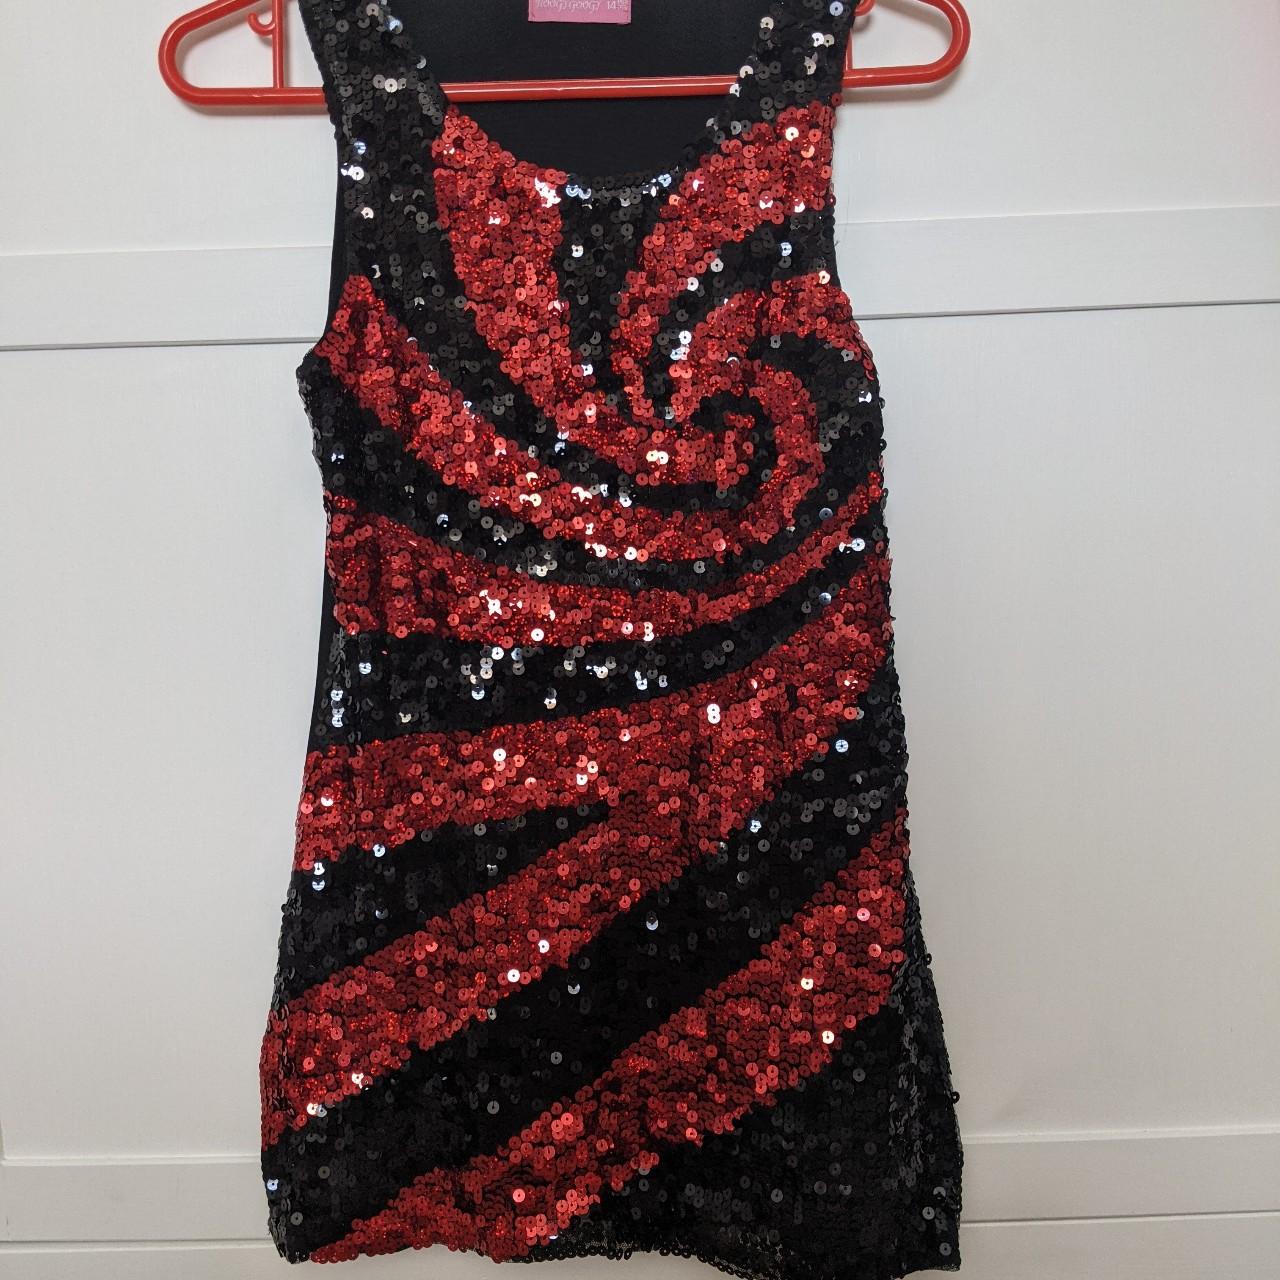 Insane y2k stretchy sequin swirl black and red party... - Depop